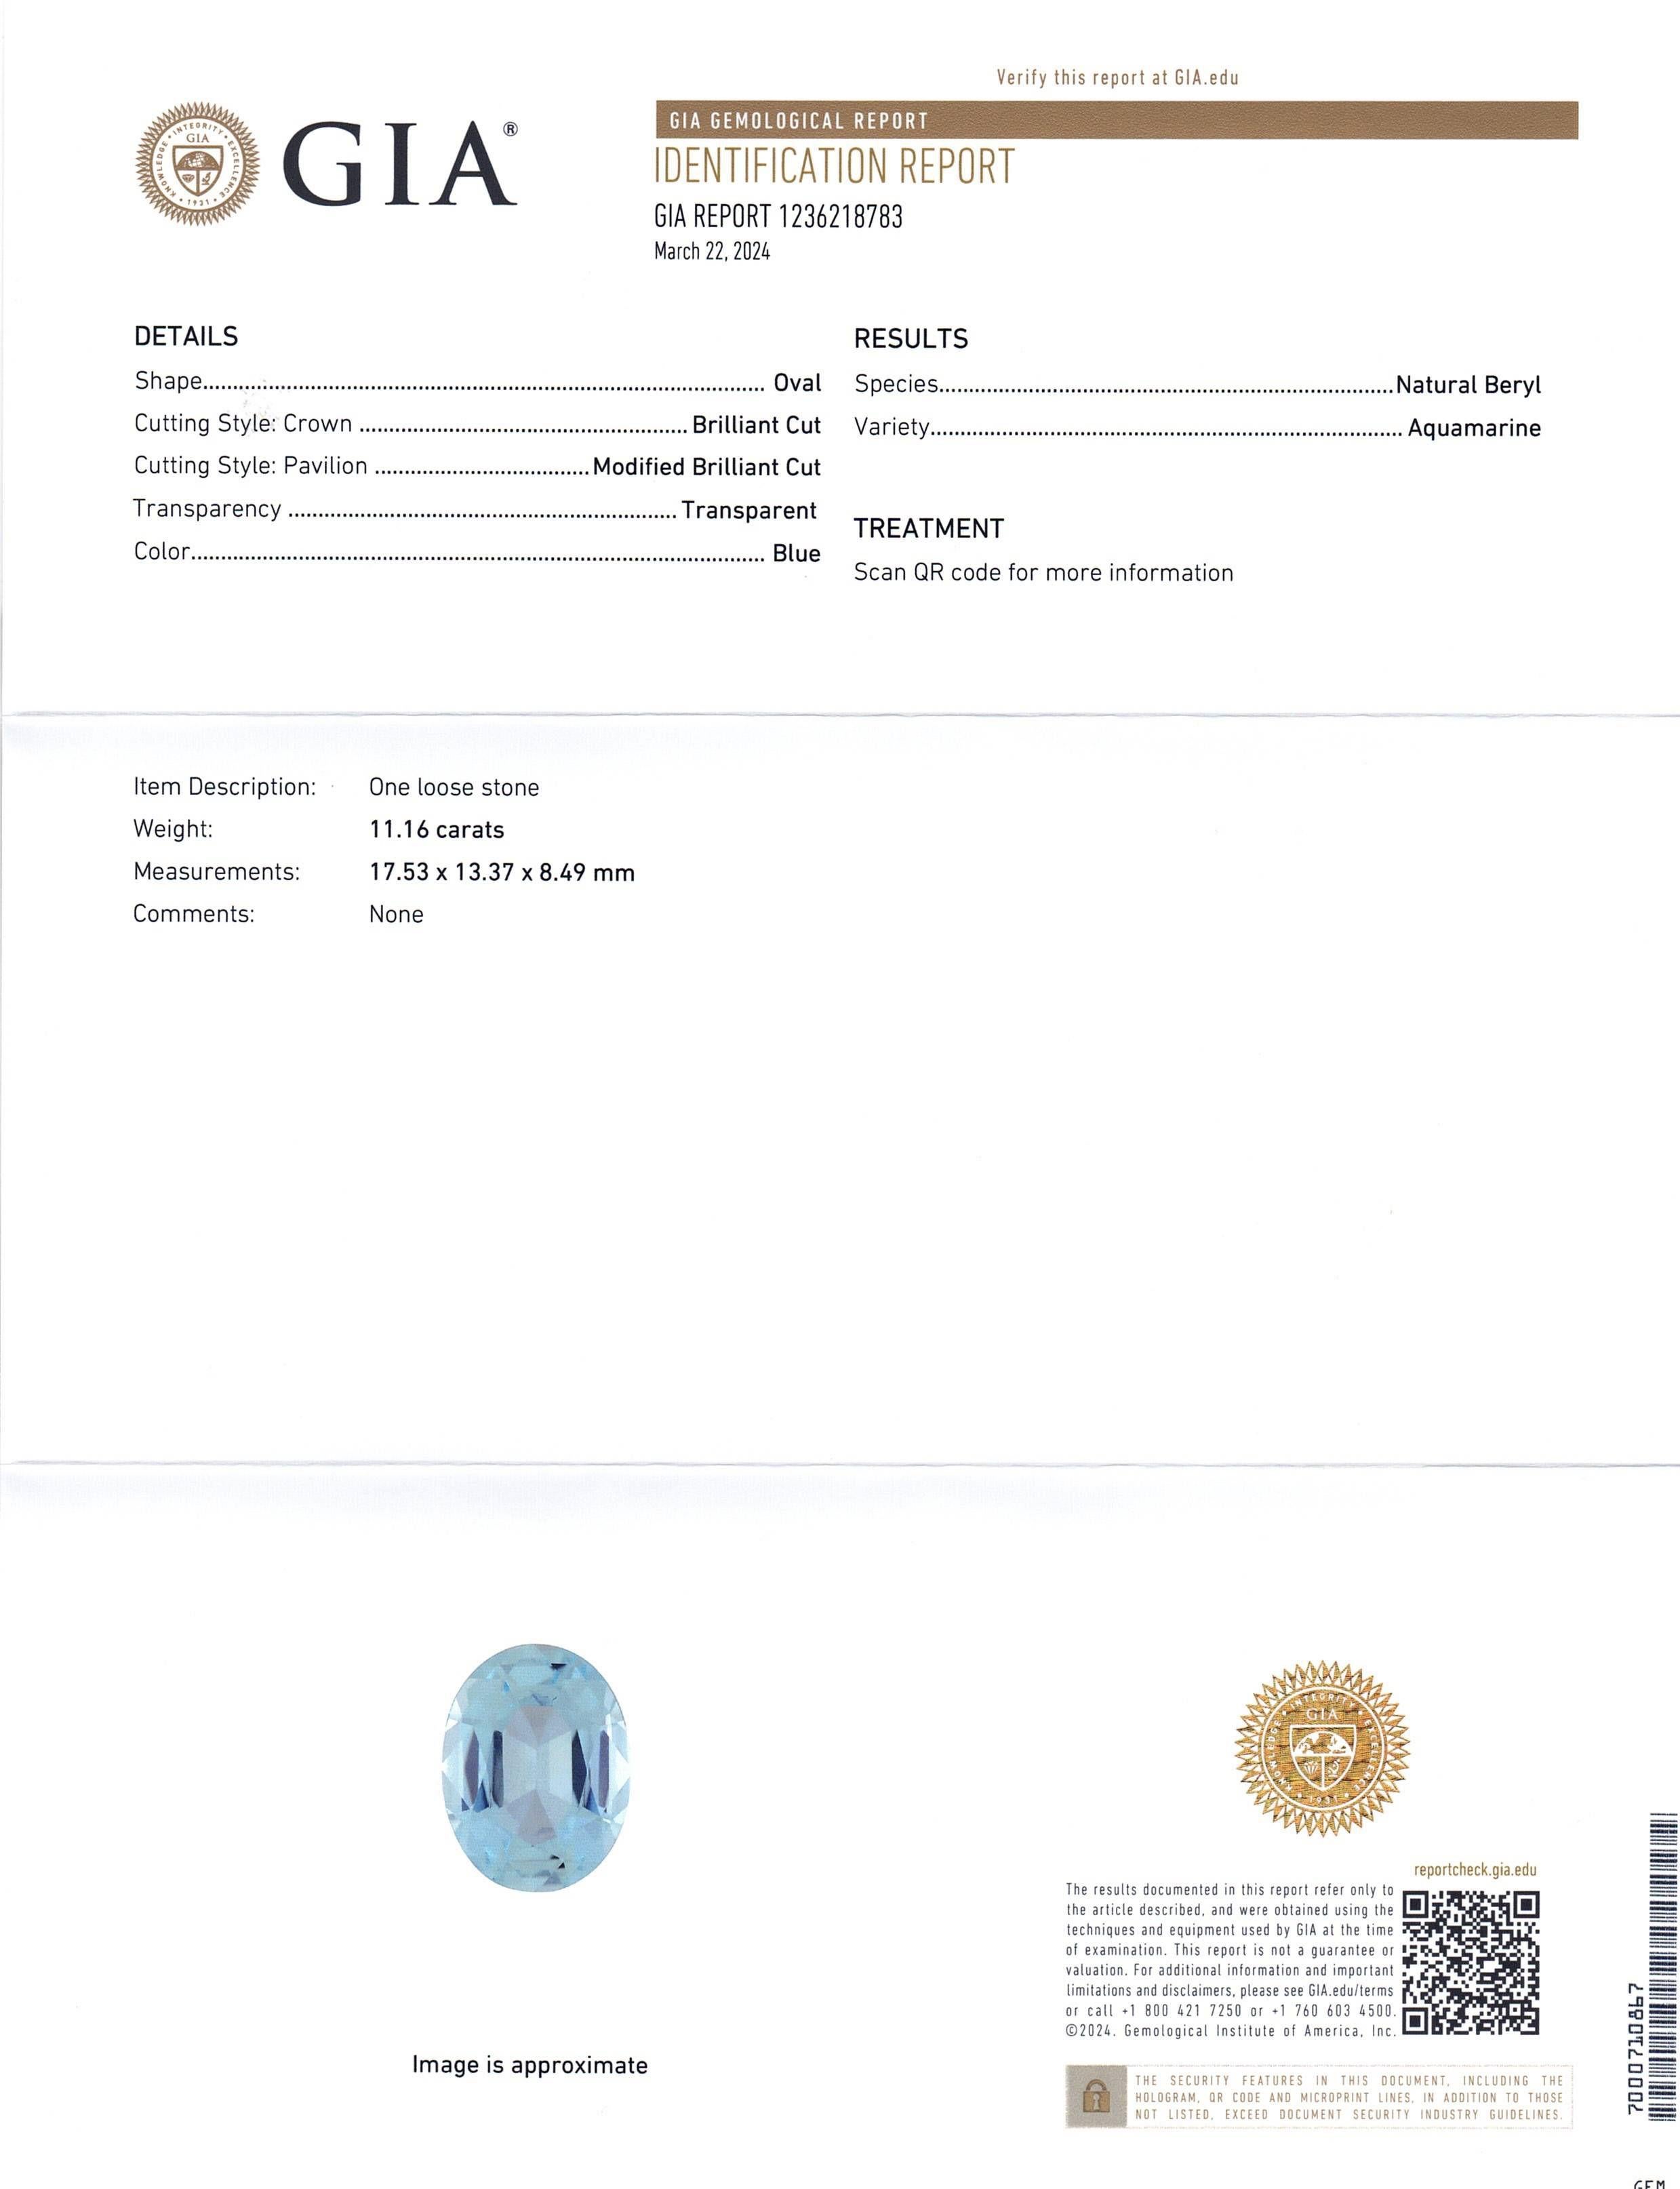 This is a stunning GIA Certified Aquamarine 


The GIA report reads as follows:

GIA Report Number: 1236218783
Shape: Oval
Cutting Style: 
Cutting Style: Crown: Brilliant Cut
Cutting Style: Pavilion: Modified Brilliant Cut
Transparency: